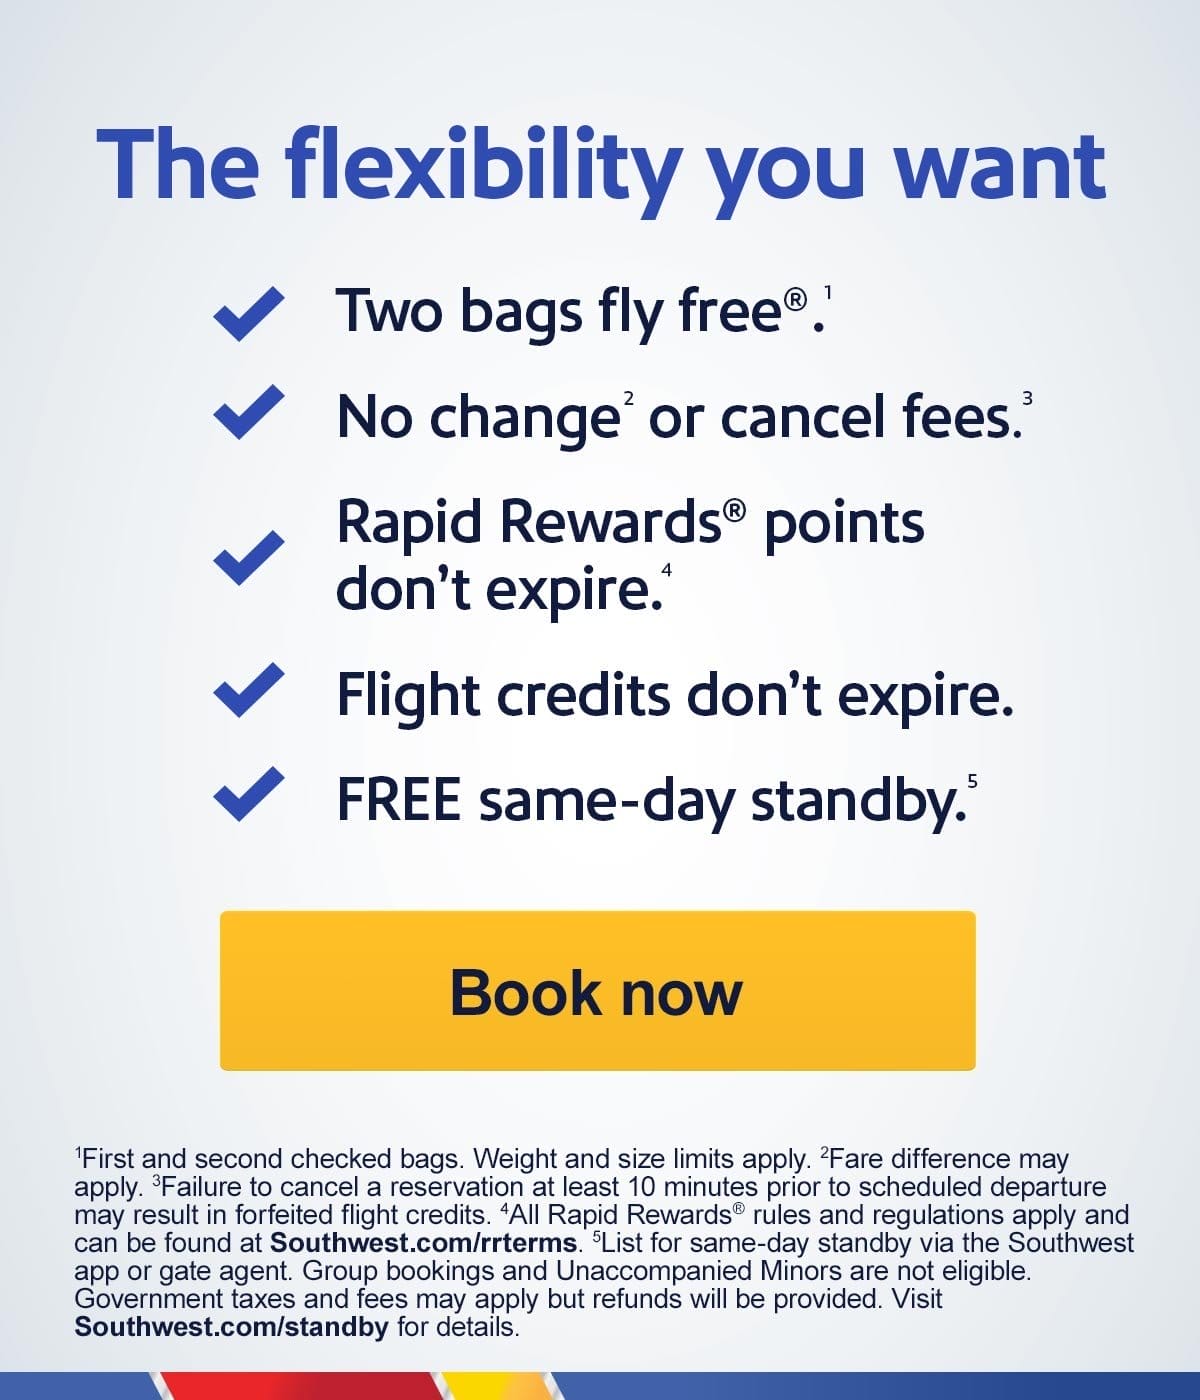  The flexibility you want Two bags fly free.1 No change2 or cancel.3 fees Rapid Rewards points don't expire.4 Flight credits don't expire. FREE same-day standby.5 [Book now] First and second checked bags. Weight and size limits apply. Fare difference may apply. Failure to cancel a reservation at least 10 minutes prior to scheduled departure may result in forfeited travel funds. All Rapid Rewards rules and regulations apply and can be found at Southwest.com/rrterms. List for same-day standby via the Southwest app or gate agent. Government taxes and fees may a